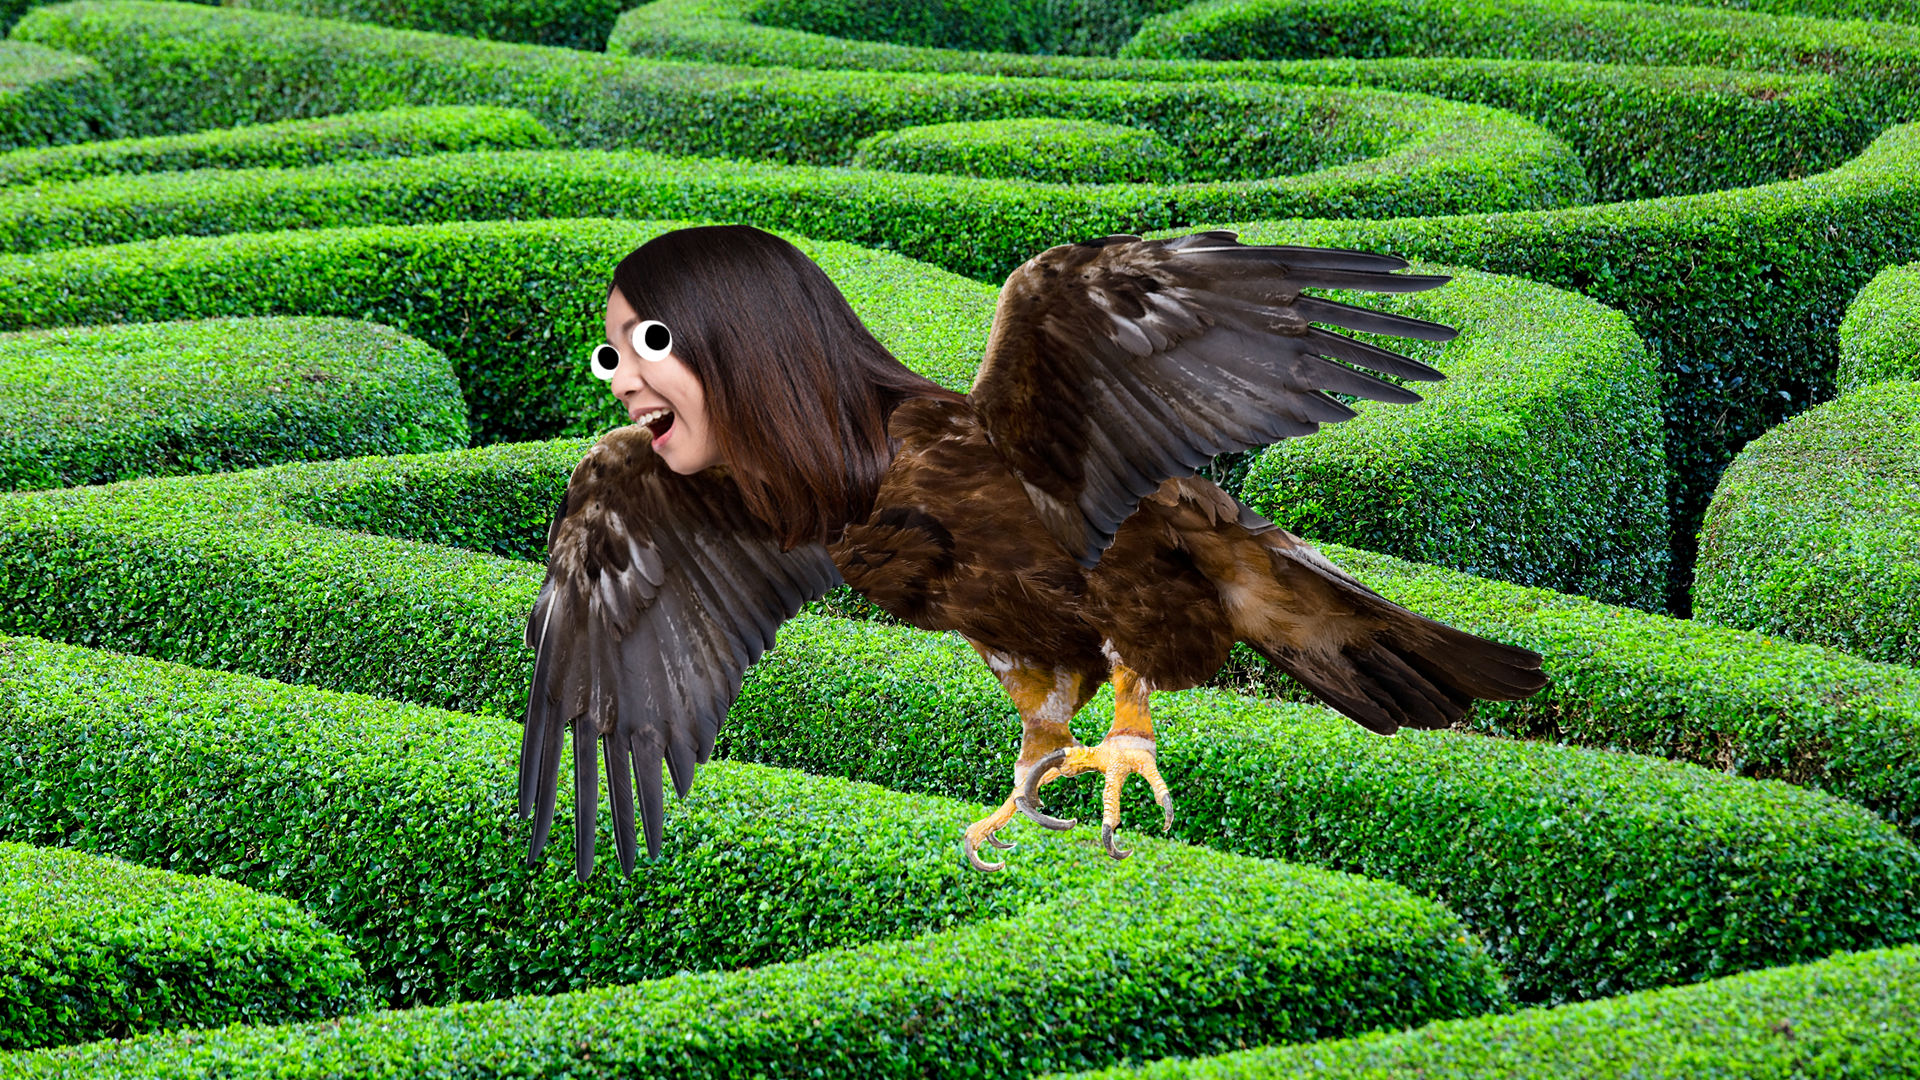 A harpy in a maze